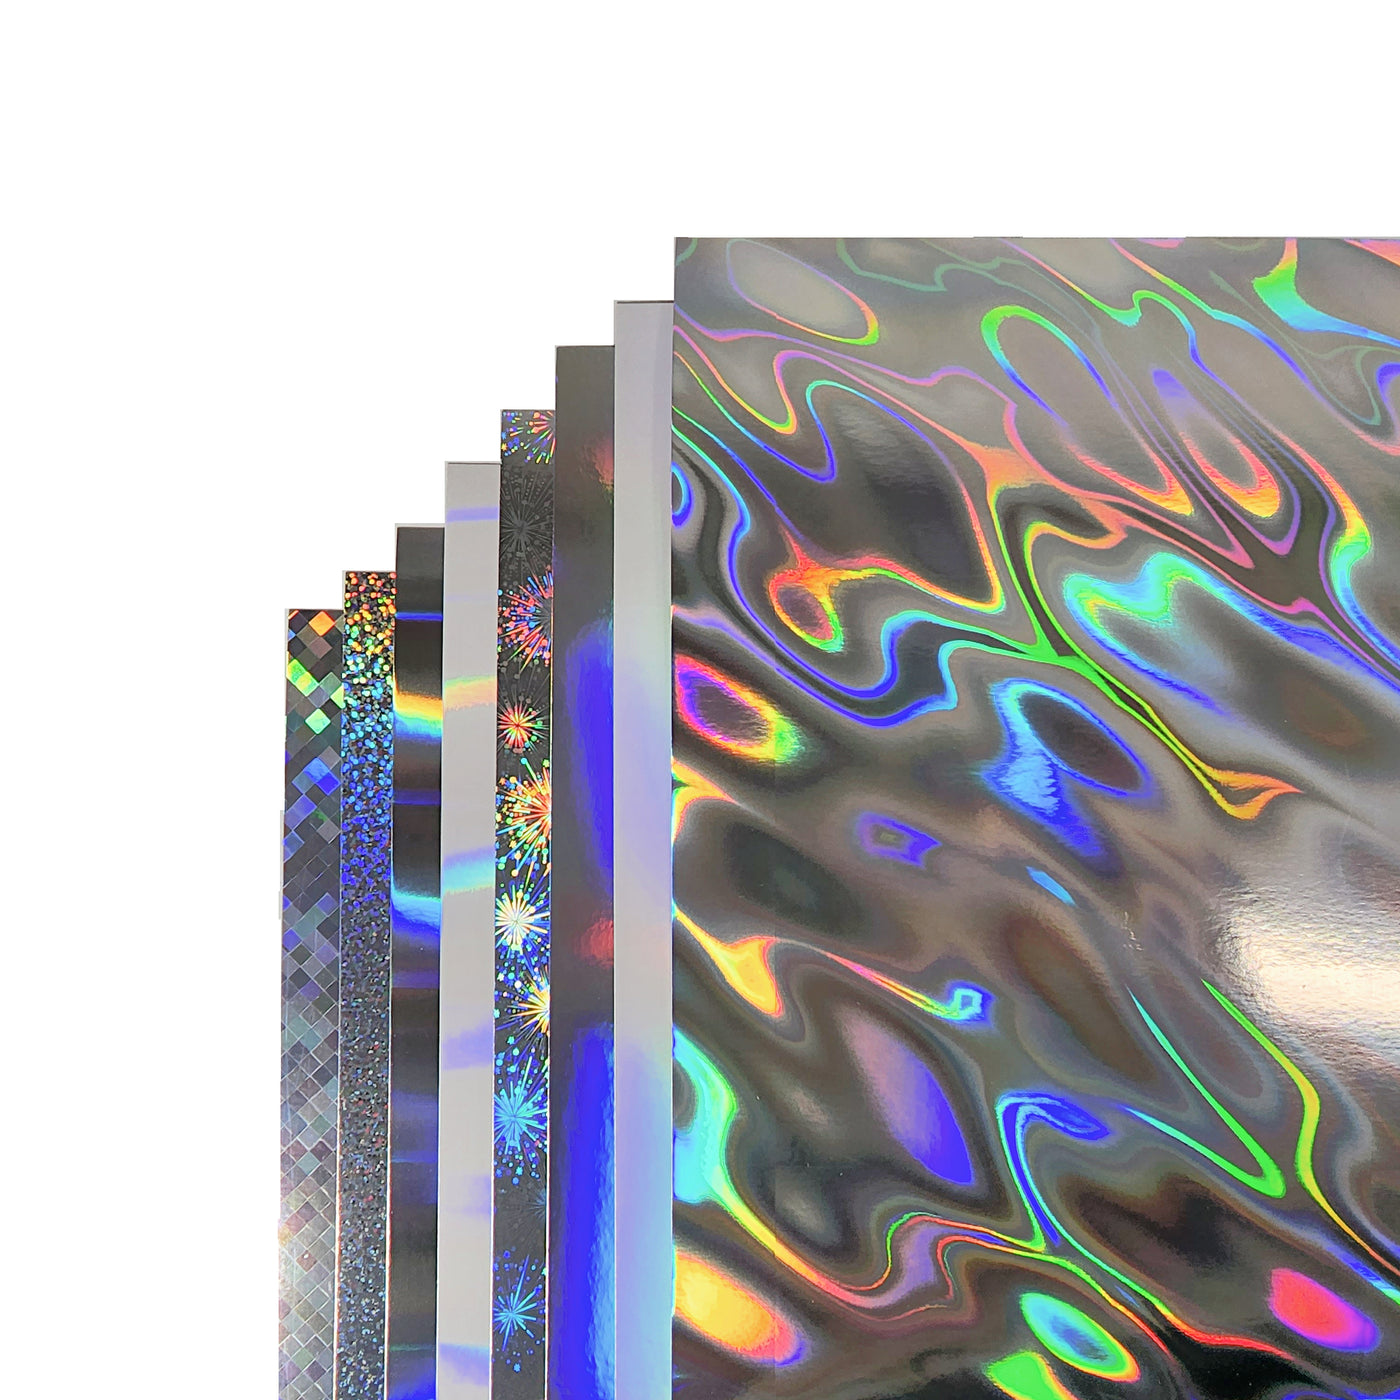 Holographic Cardstock Variety Pack, 8 sheets, 1 of each color